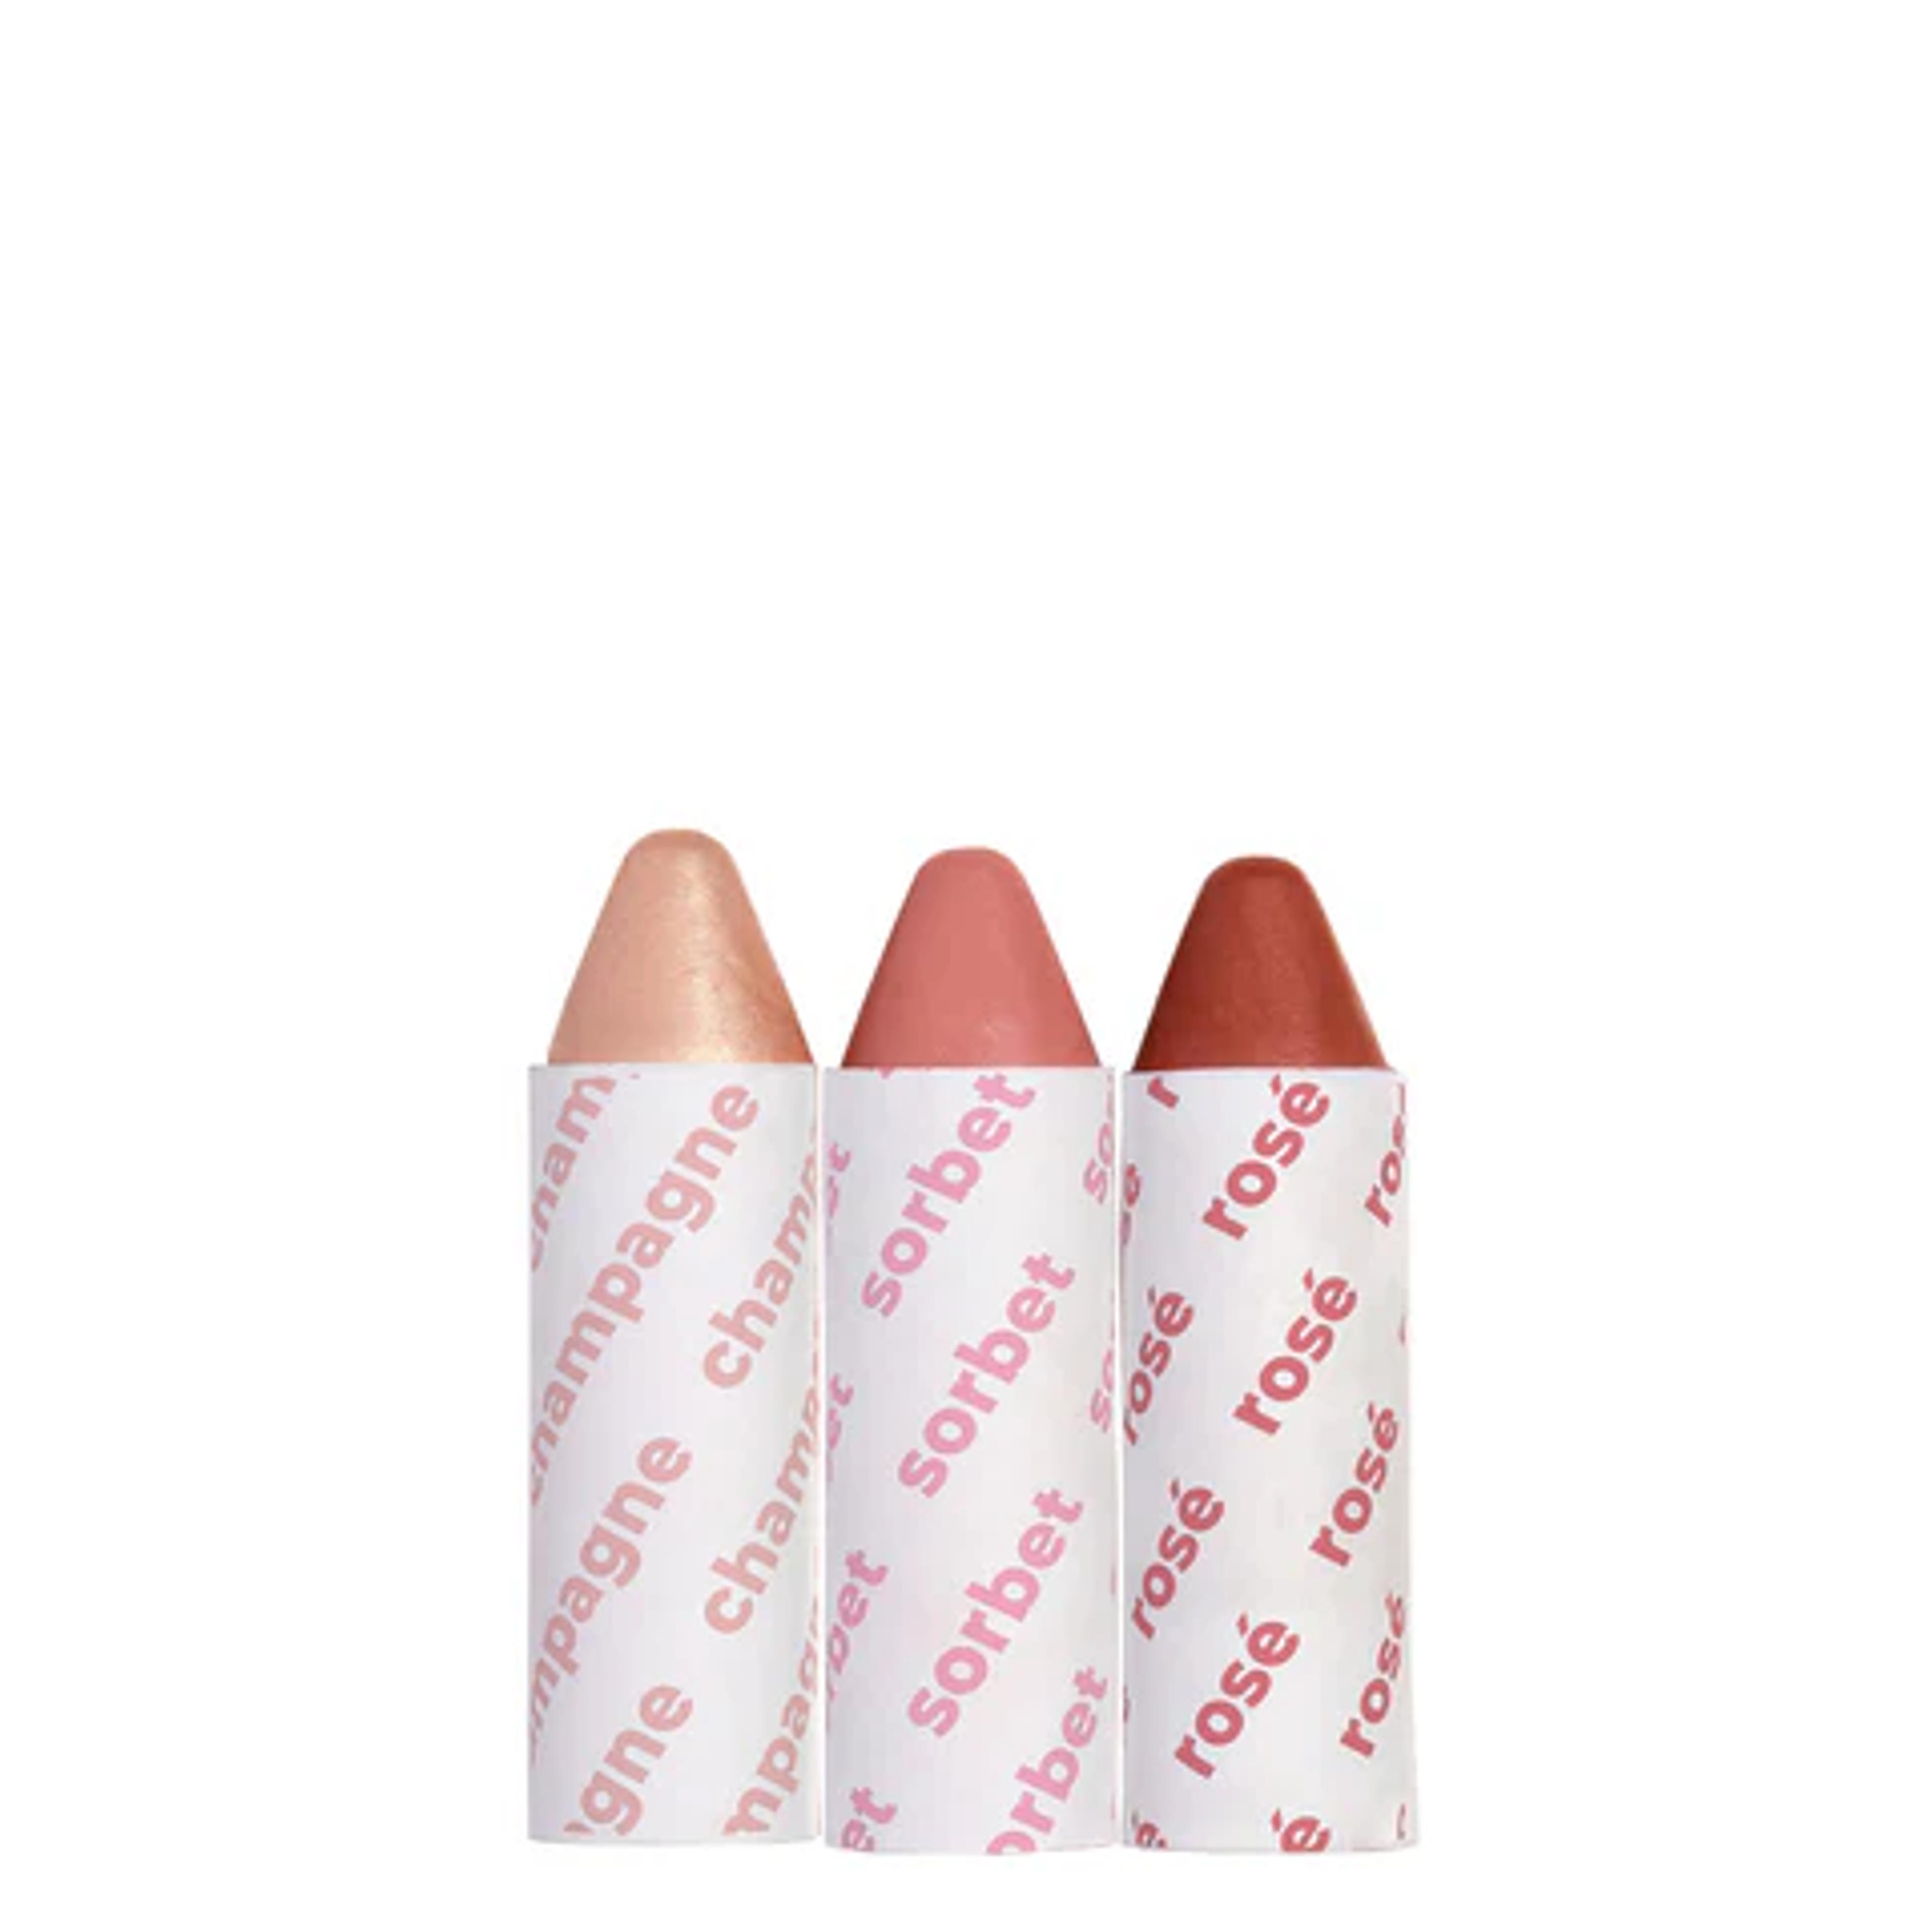 Axiology Balmie Set - Cotton Candy Skies | Plastic Free Makeup